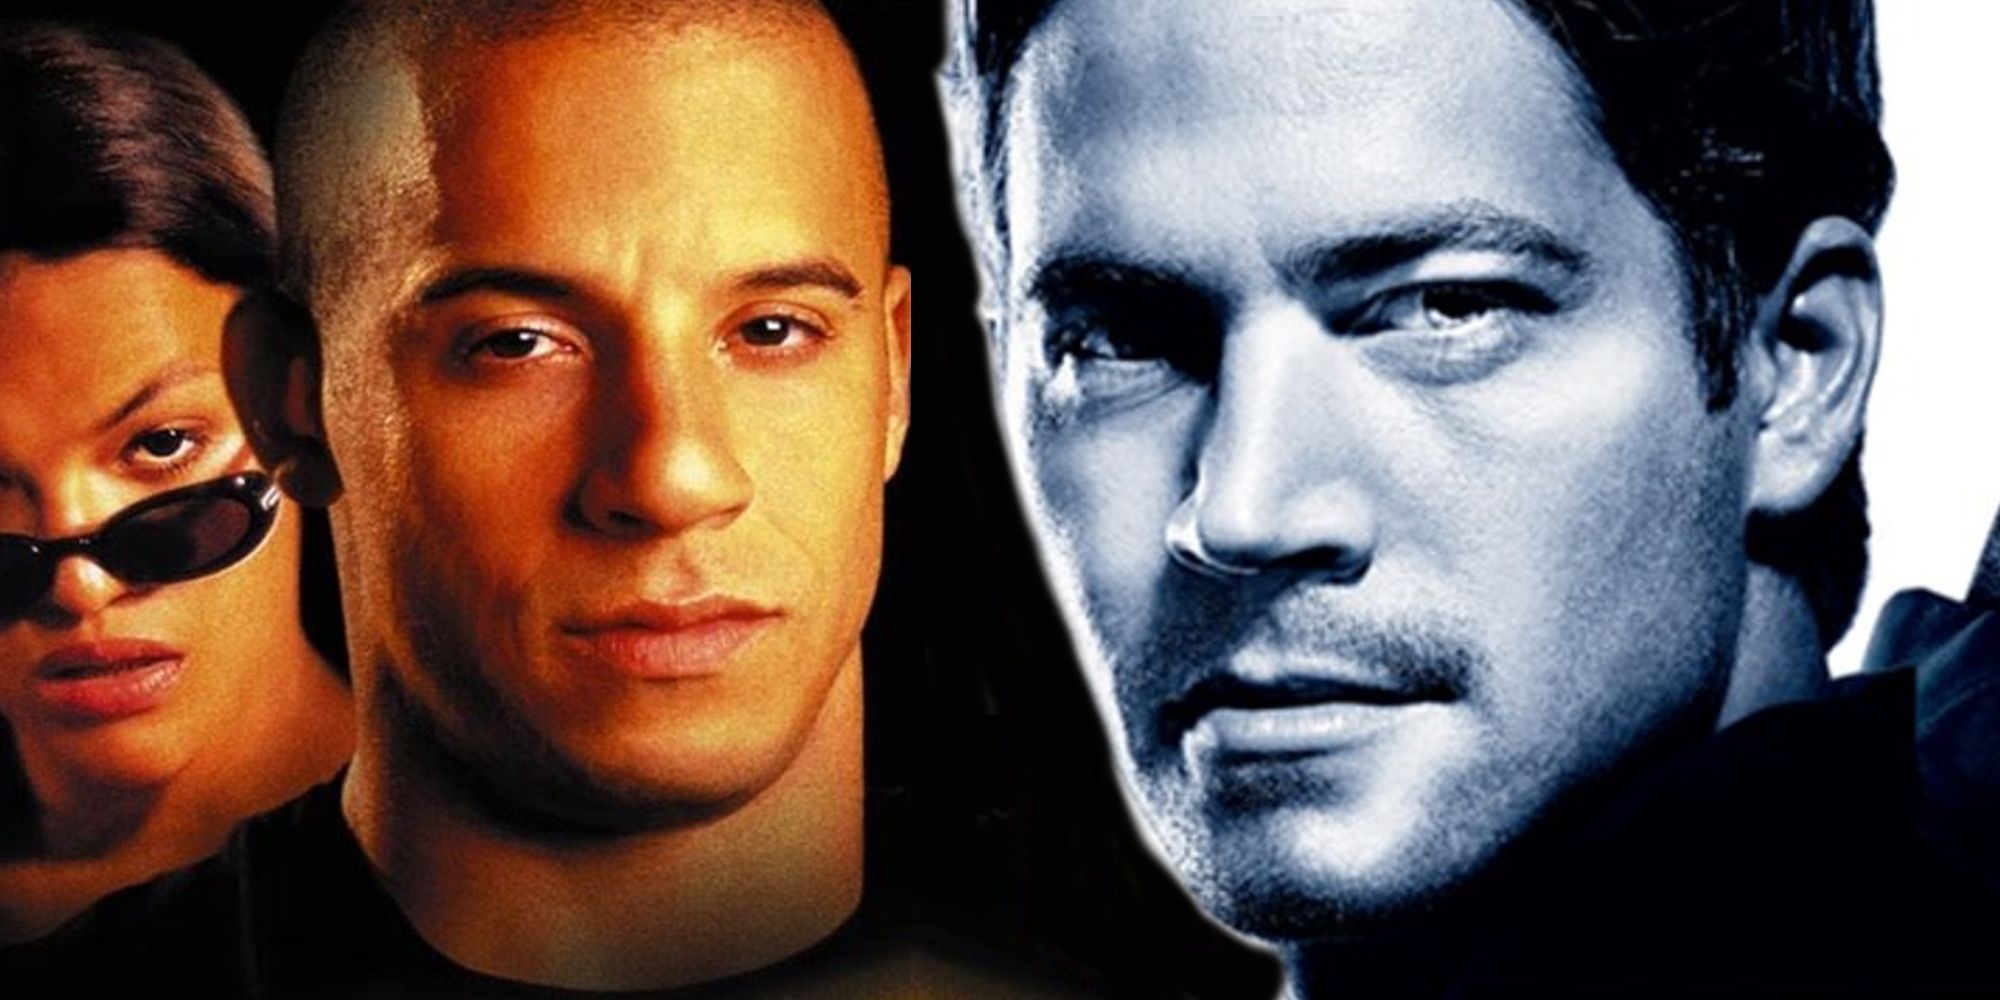 Blended image of Paul Walker and Vin Diesel in the Fast and the Furious movies